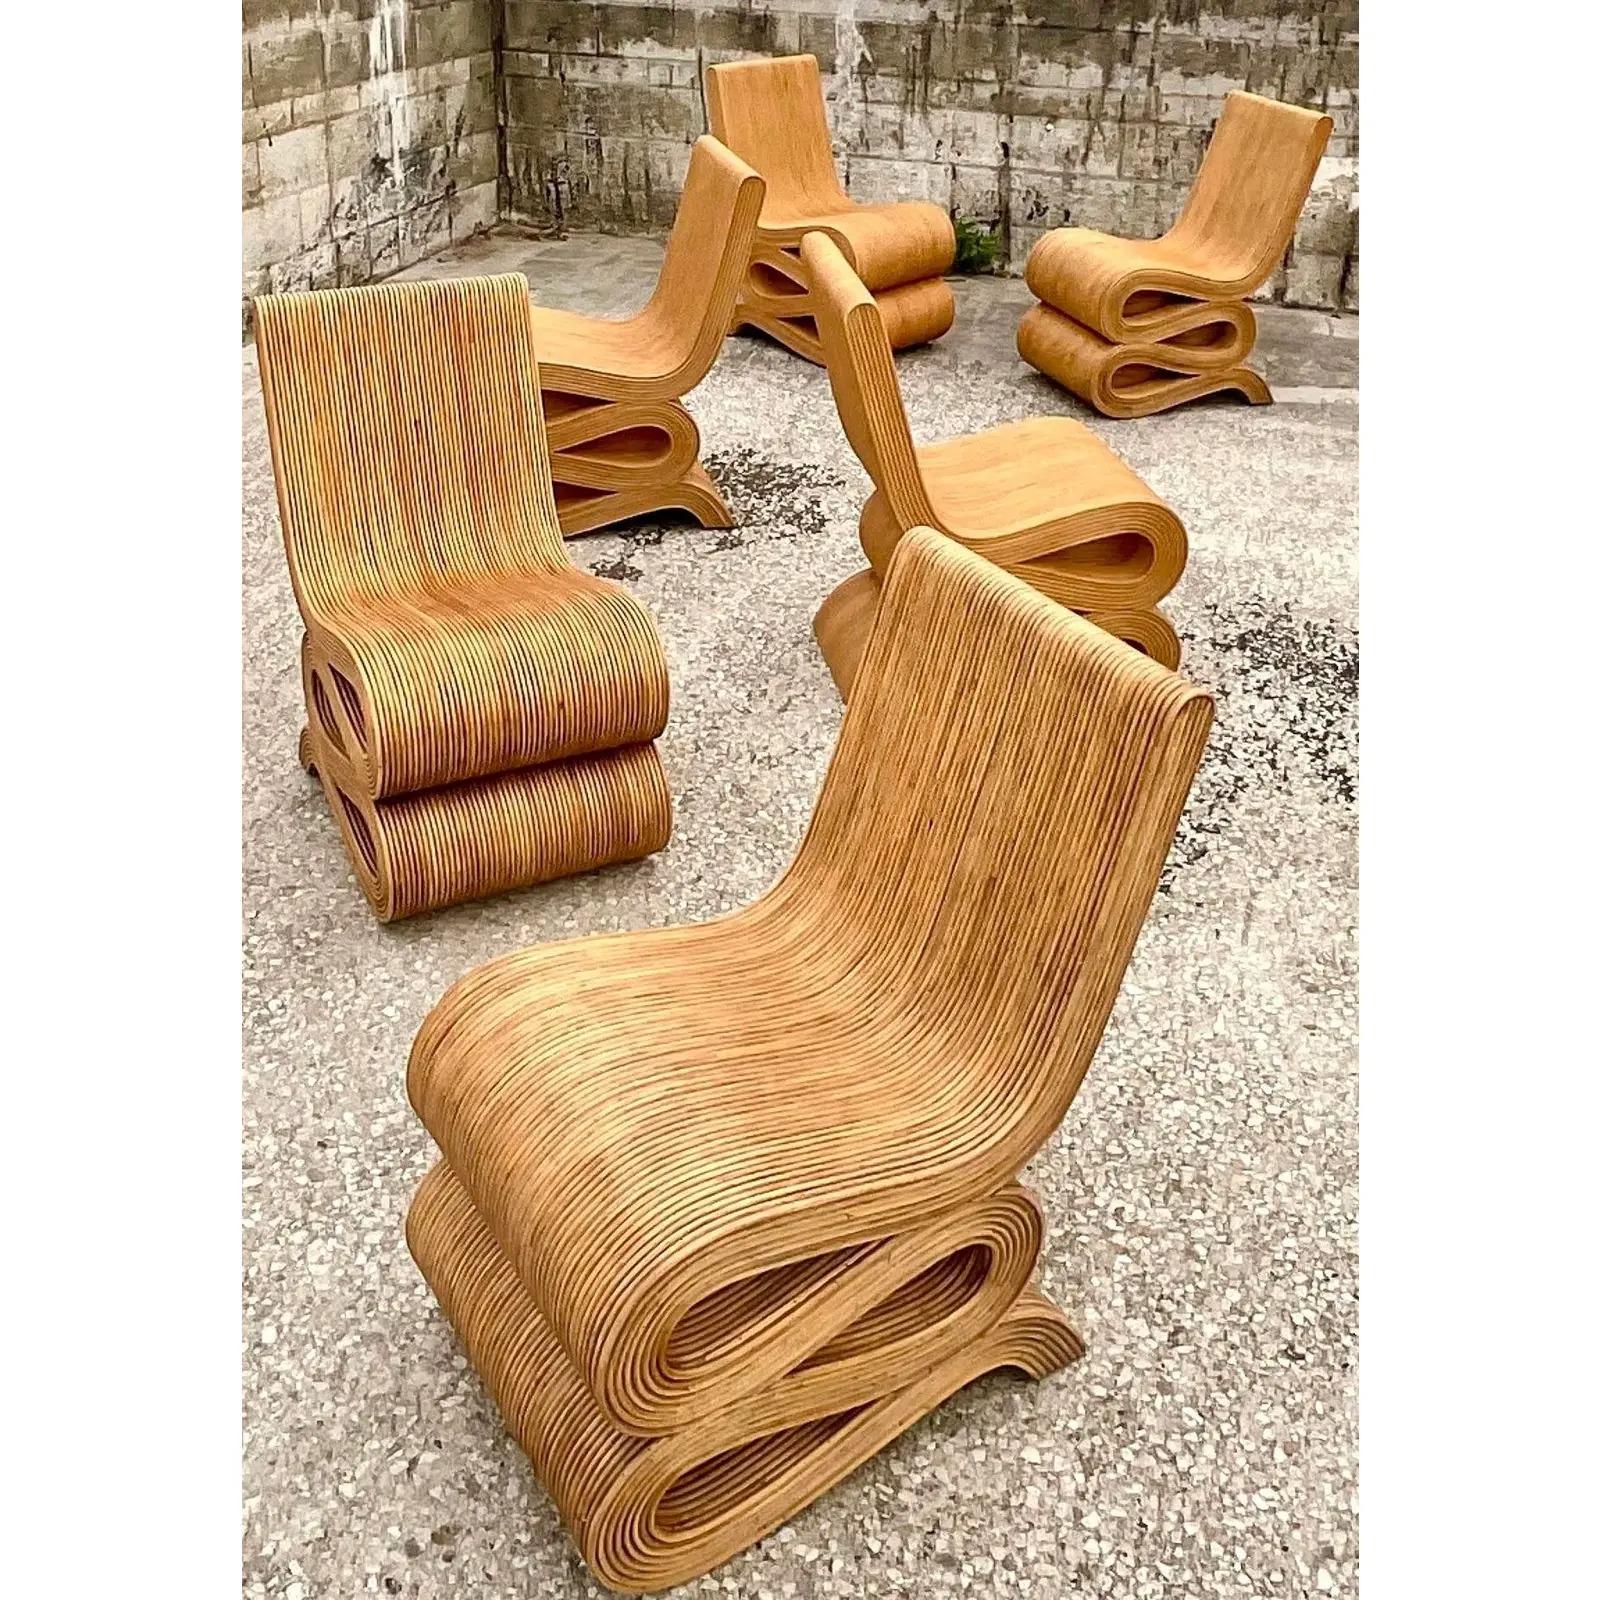 Fabulous Coastal Pencil Reed dining chairs. The iconic “wiggle Chair” design in a chic honey color. Sold in pairs with three sets available. Acquired from a Miami estate.